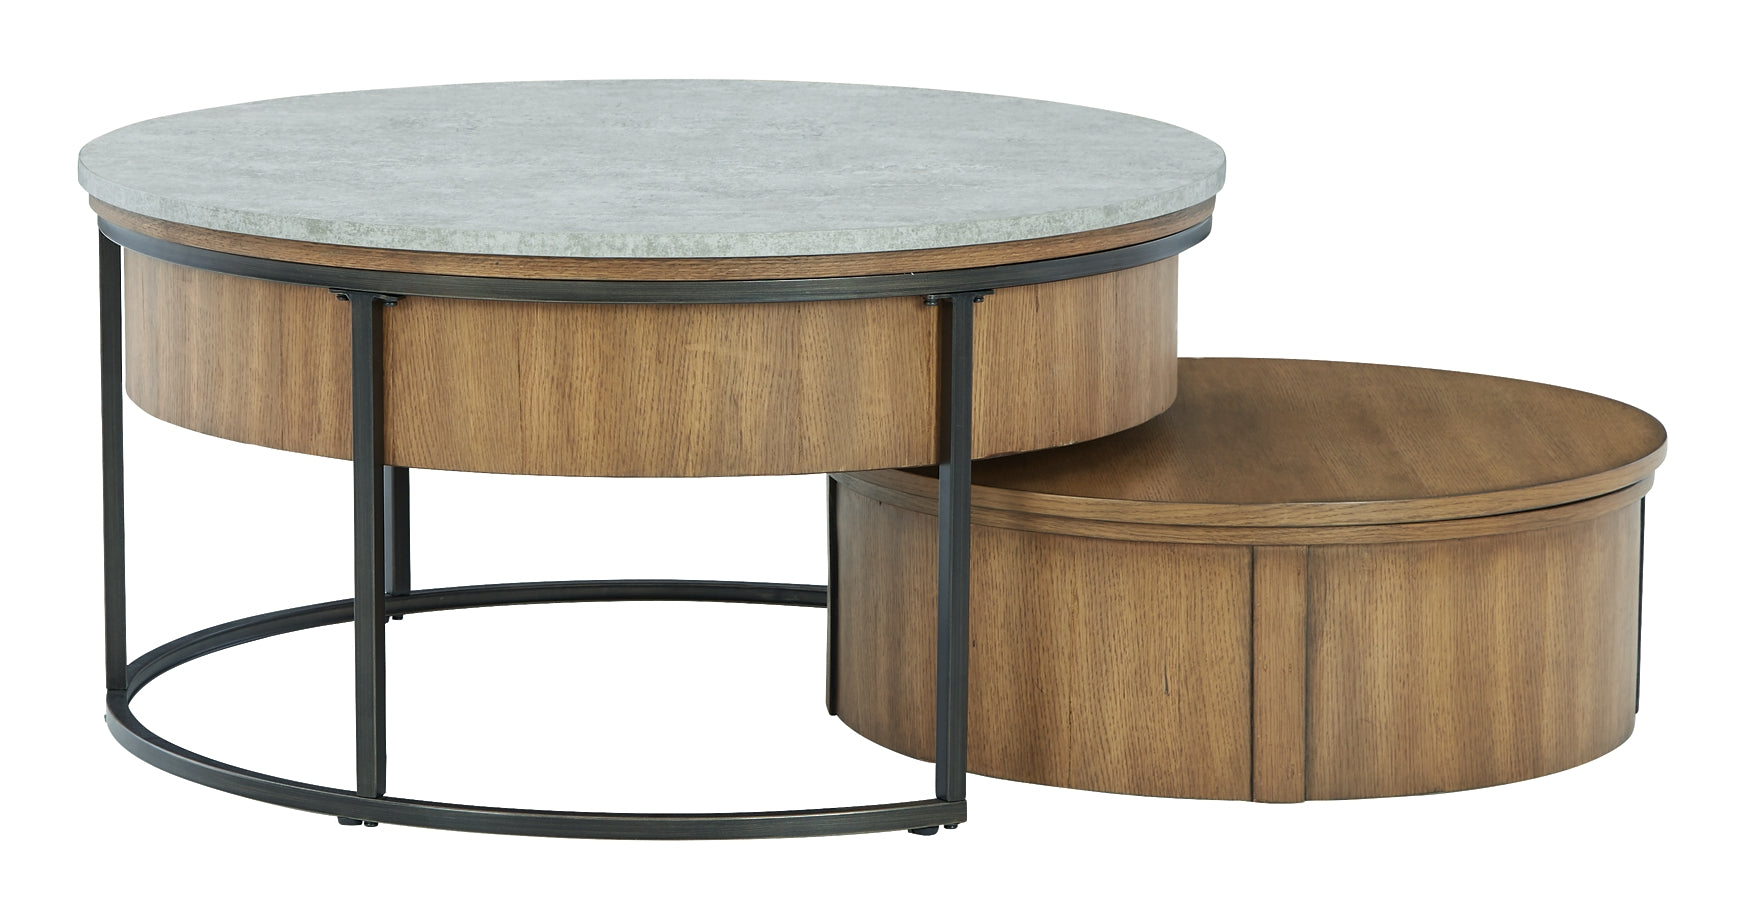 Fridley Coffee Table with 2 End Tables Signature Design by Ashley®